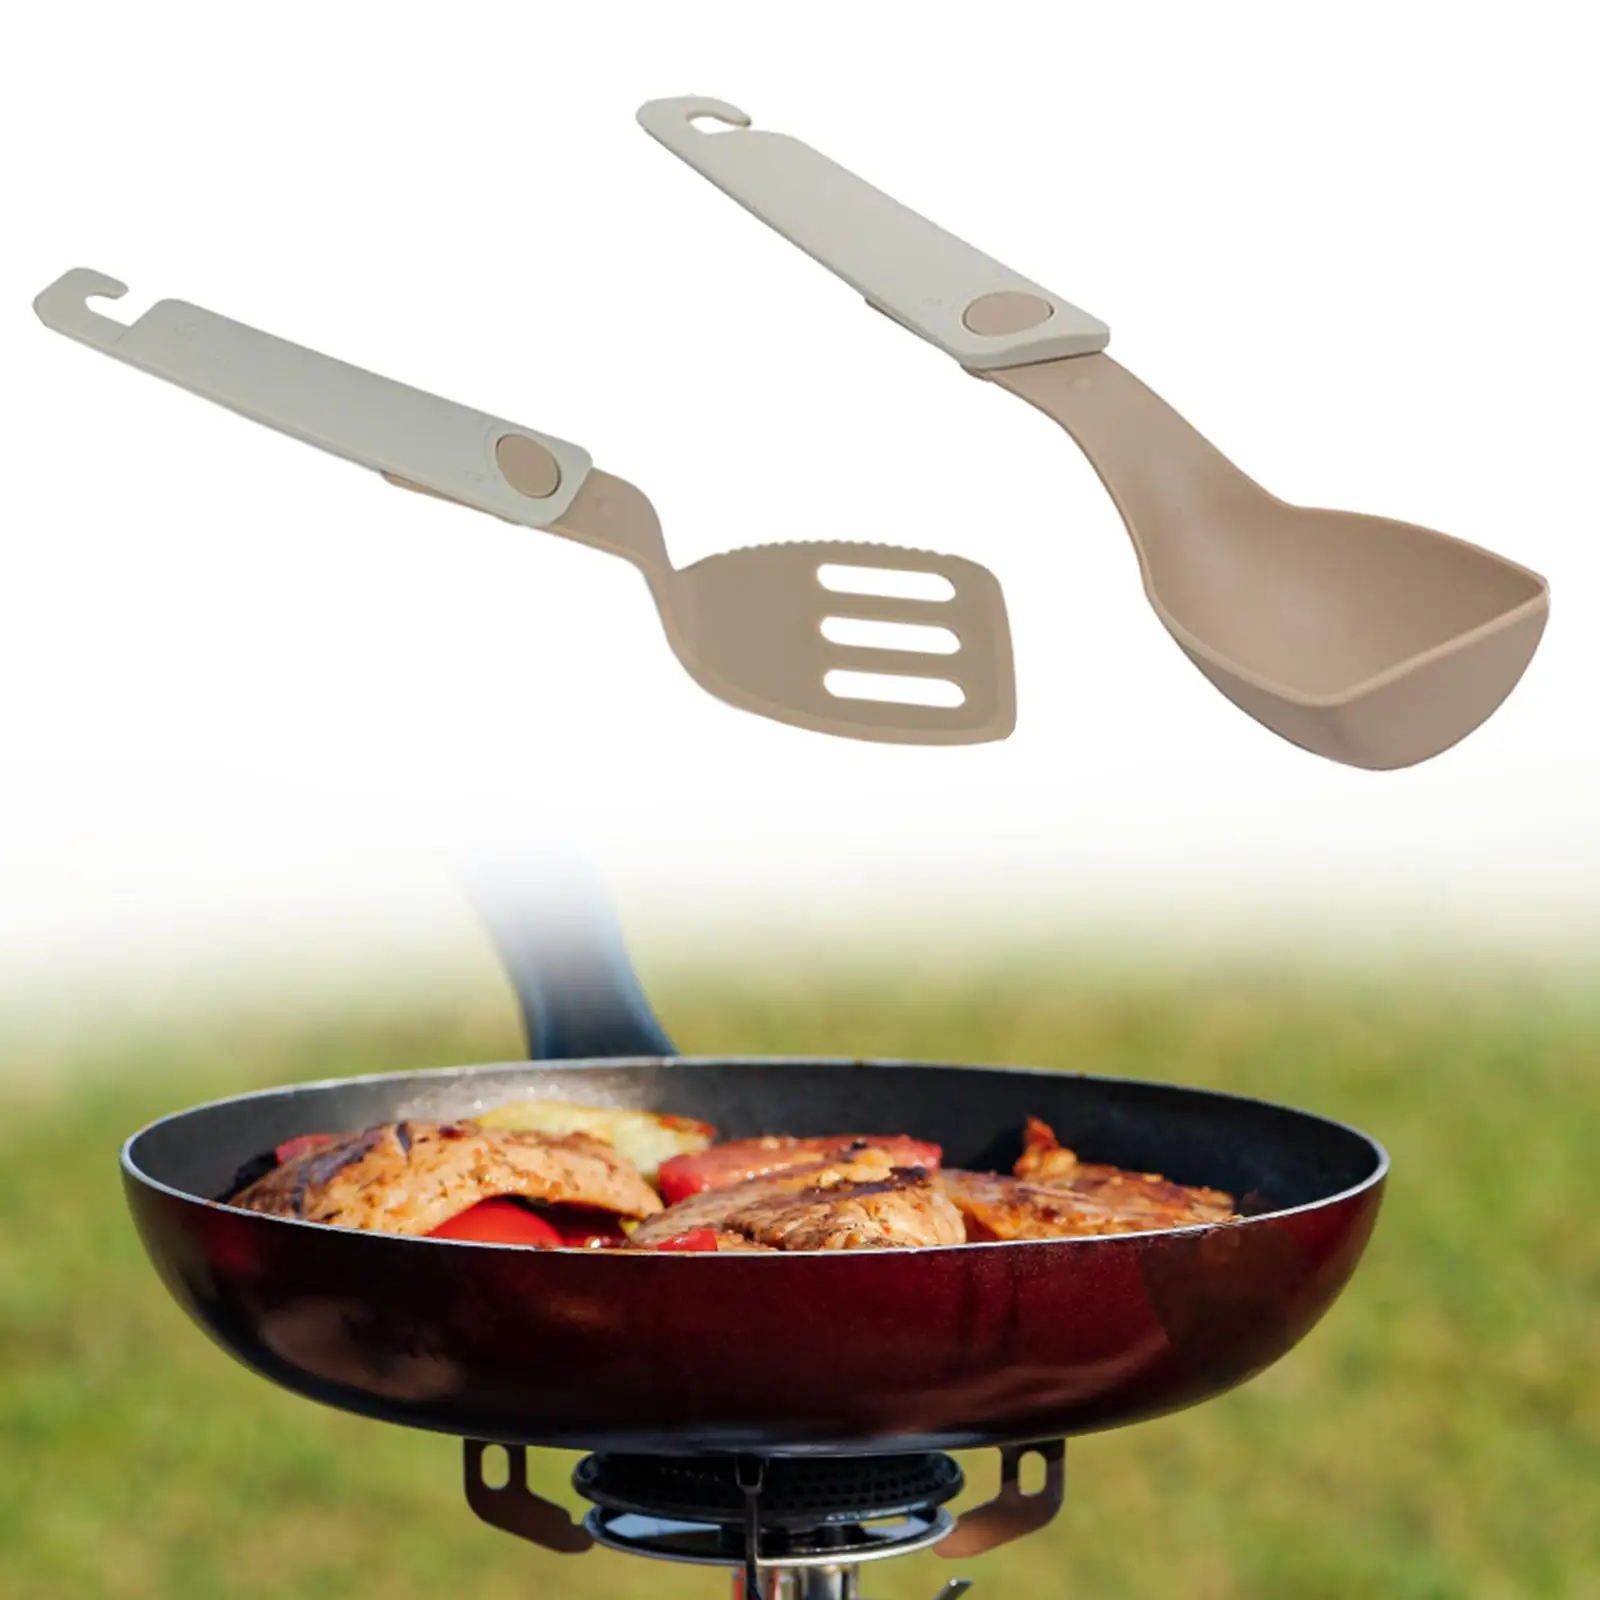 Outdoor Tableware, Camping Cutlery Foldable, Cooking Utensil, Reusable Cookware